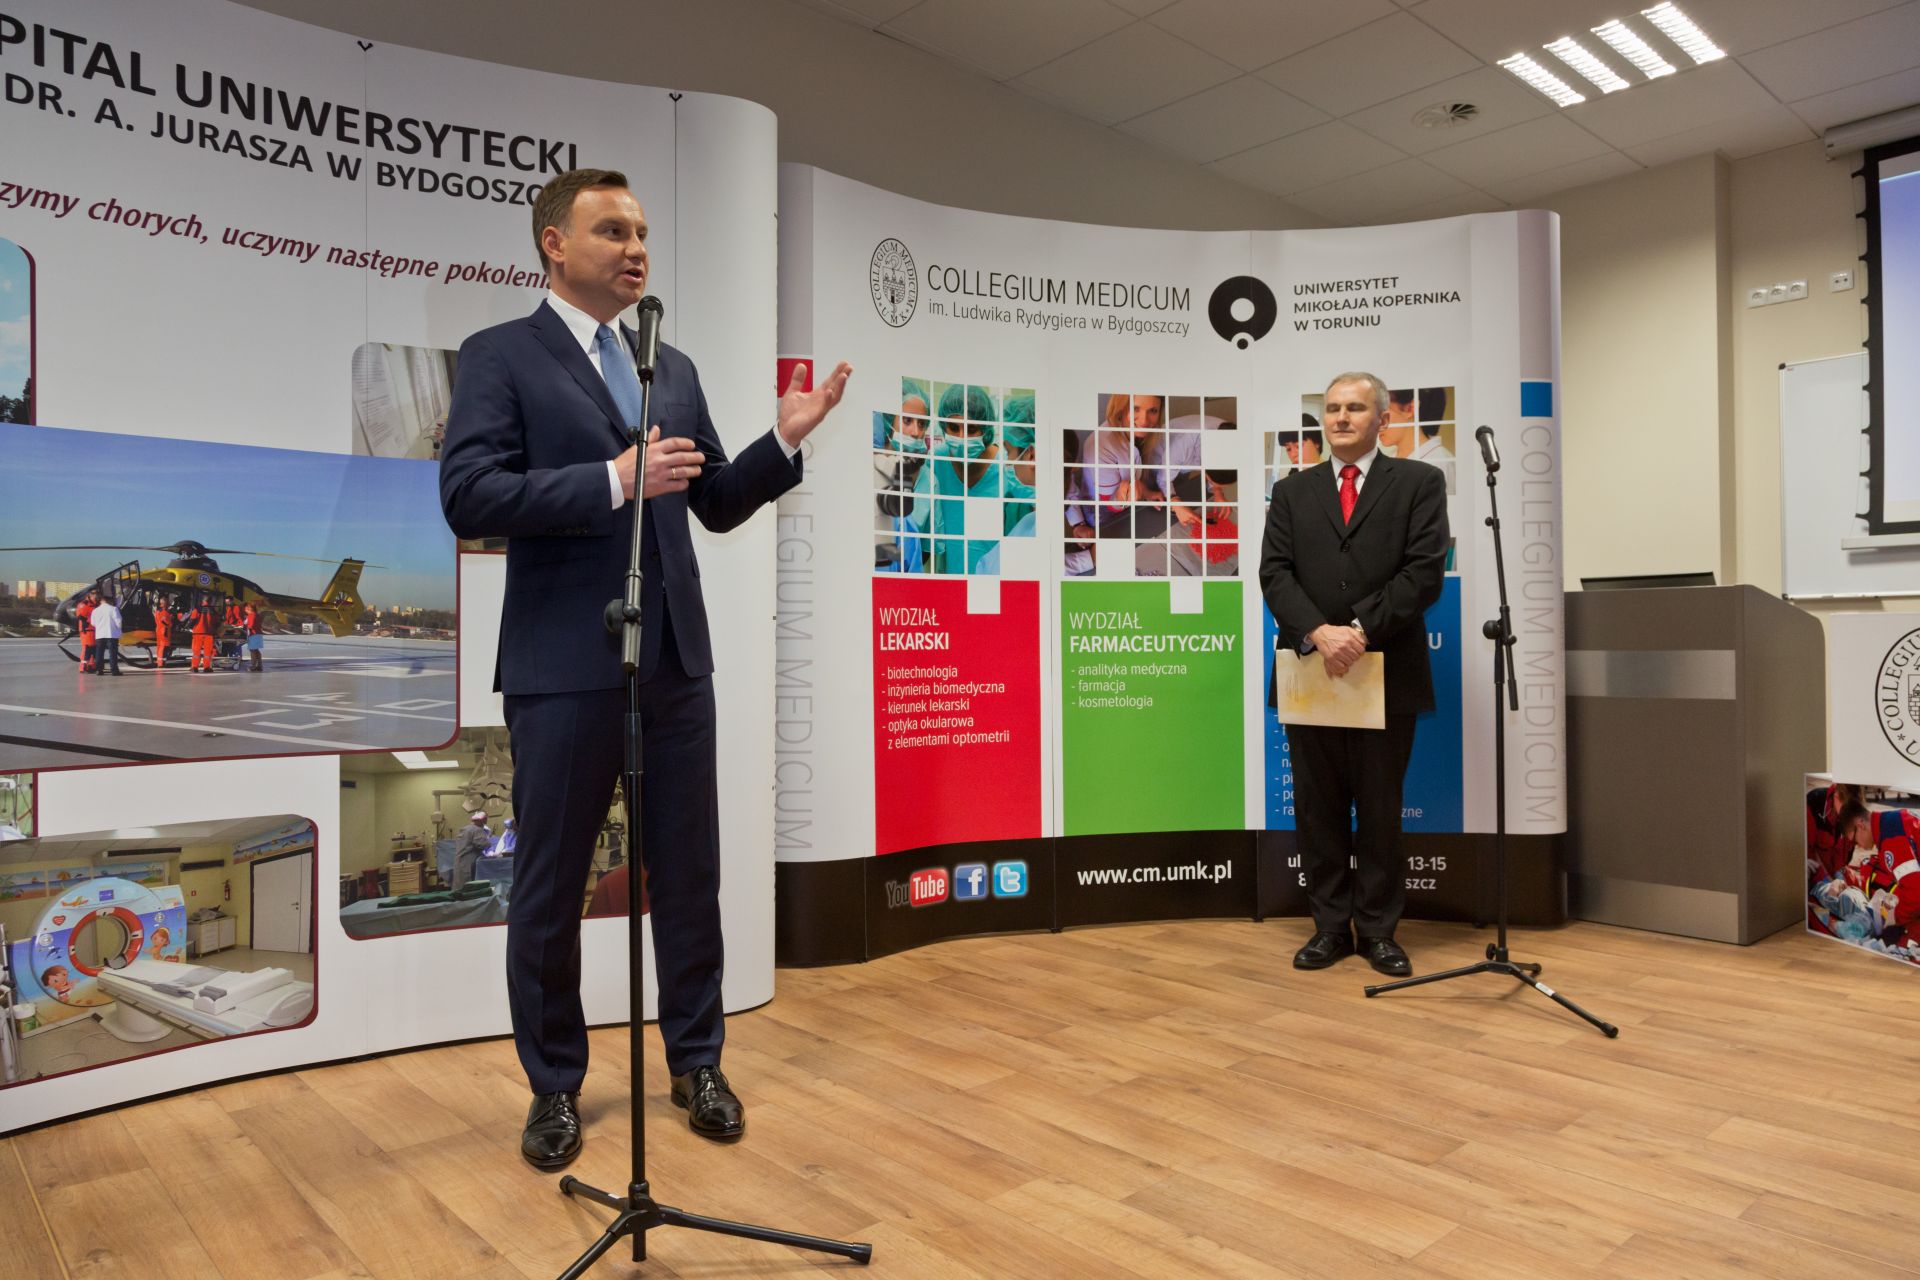 the official opening ceremony of the new hospital facility of the University Hospital no. 1 in Bydgoszcz